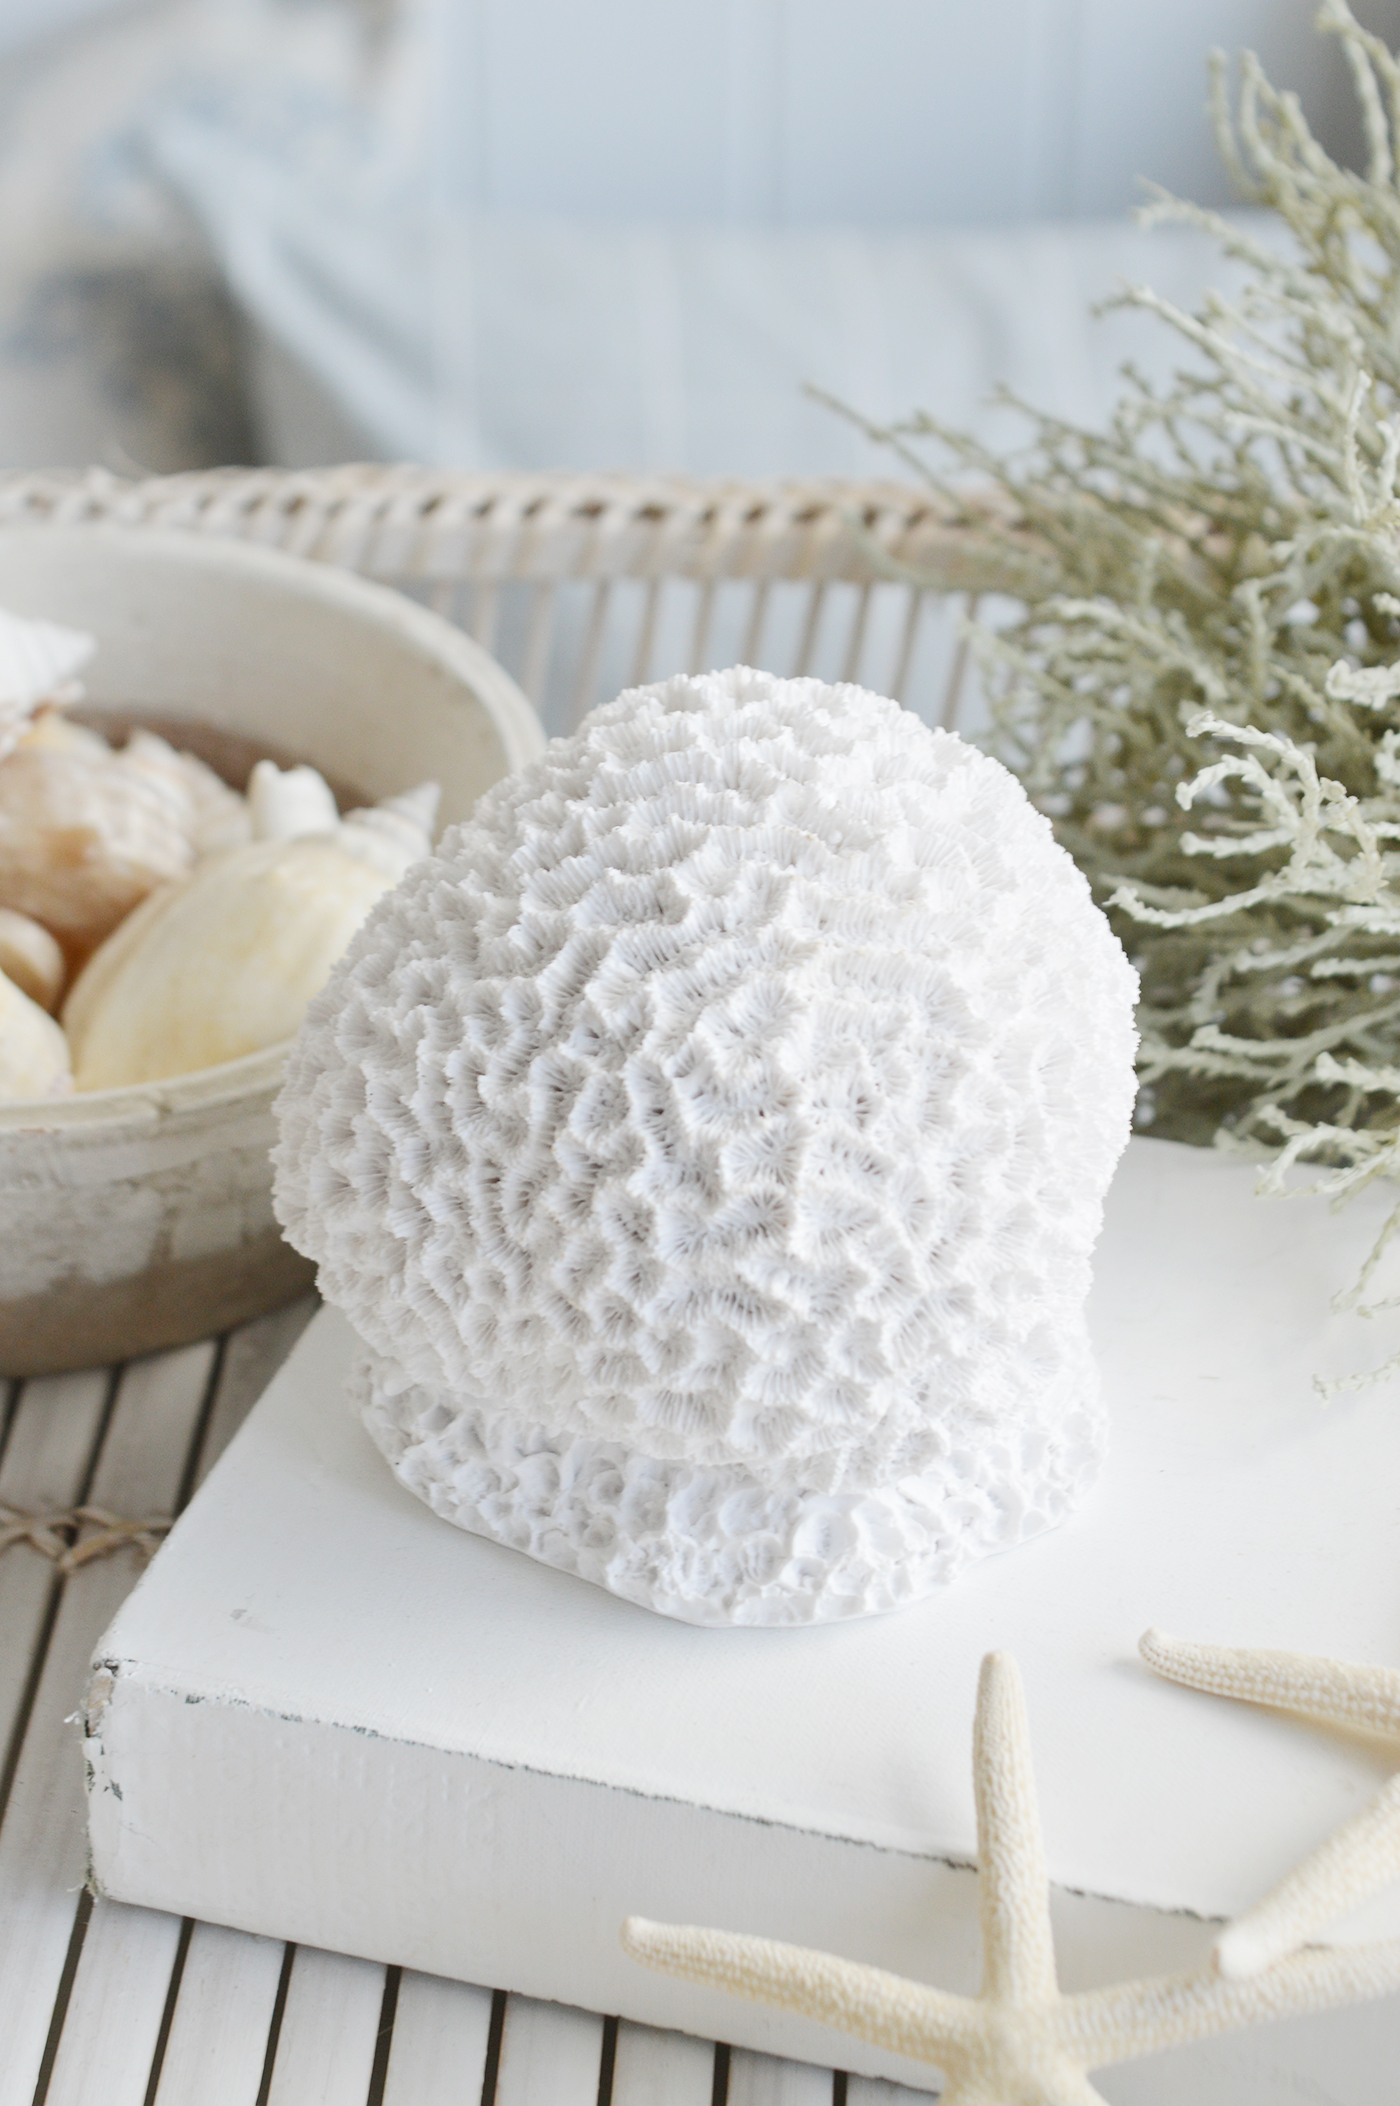 Decorative honeycomb resin faux White Coral - Coffee Table Decor Elegant Coastal New England from The White Lighthouse Home. White Furniture and home decor accessories for the home interiors. New england interiors for luxury coastal home interiors